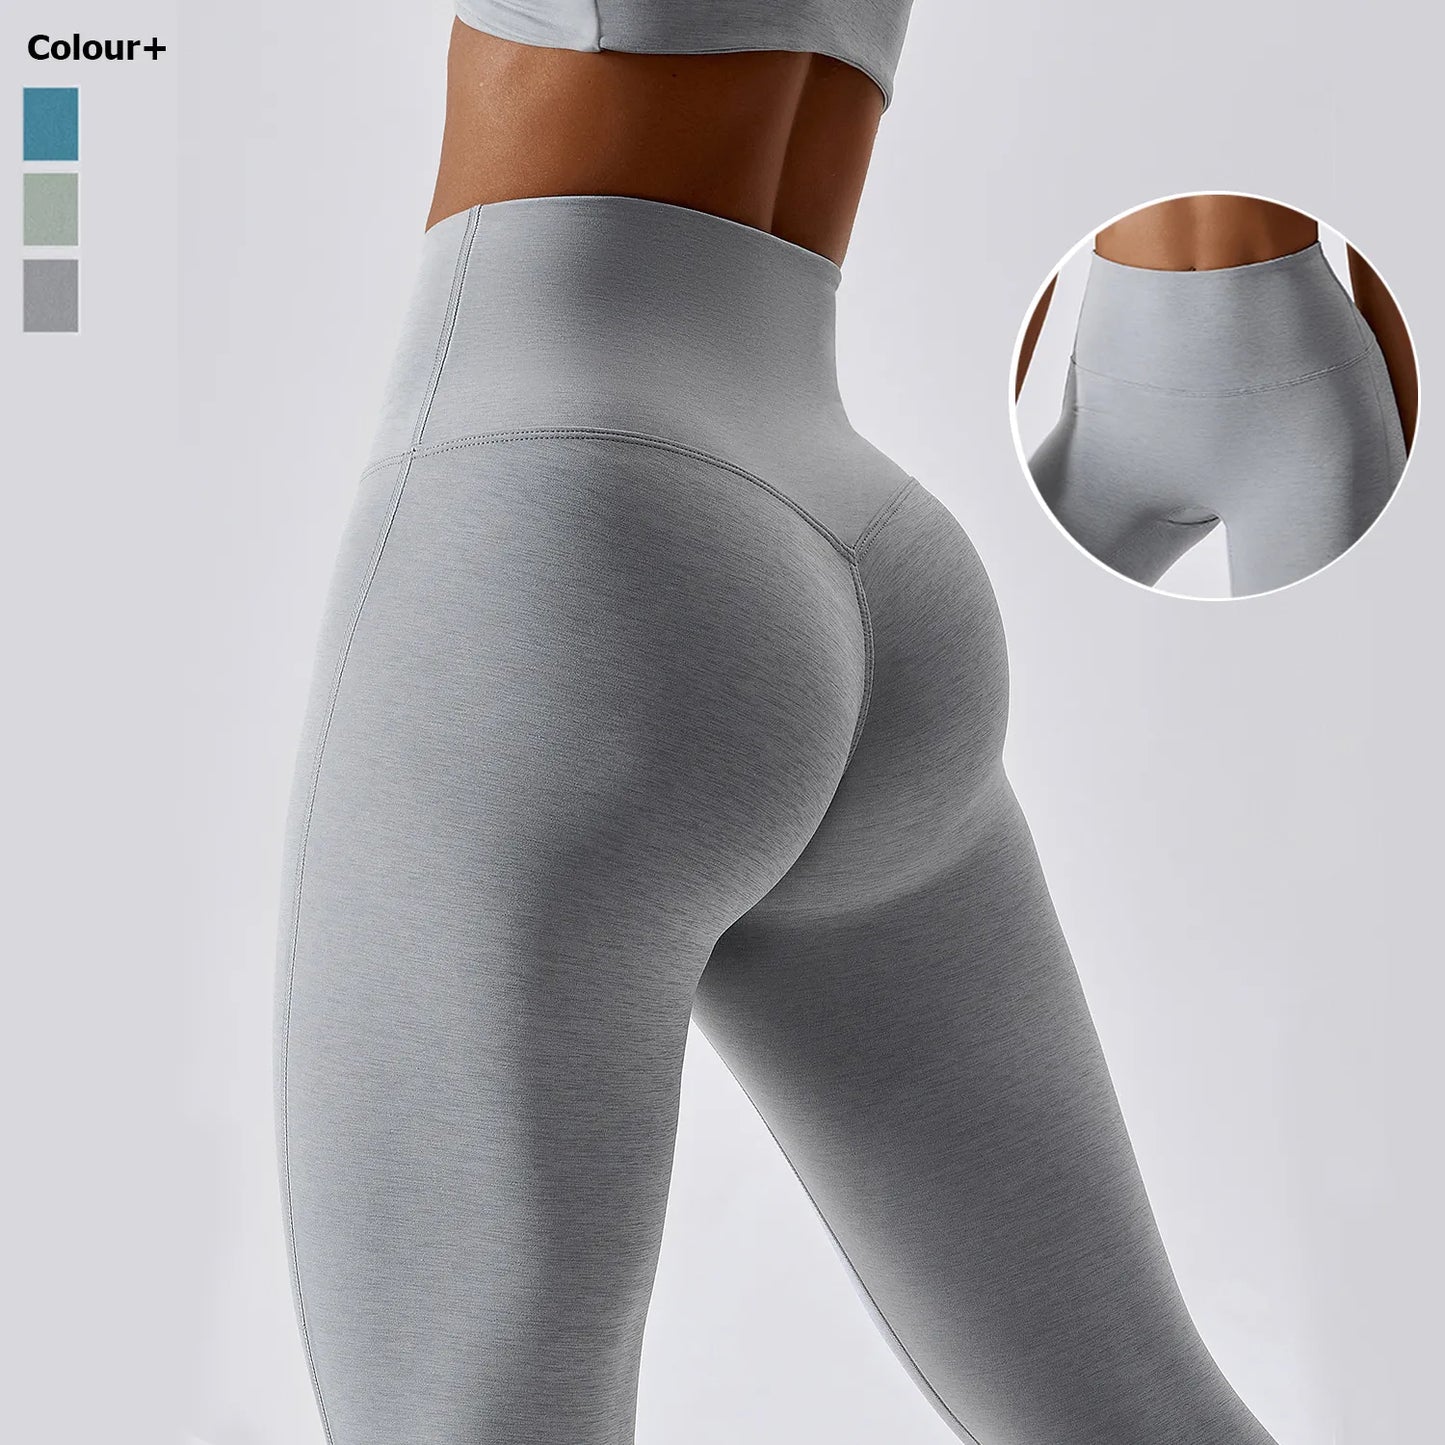 New Buttery Soft White Yoga Pants